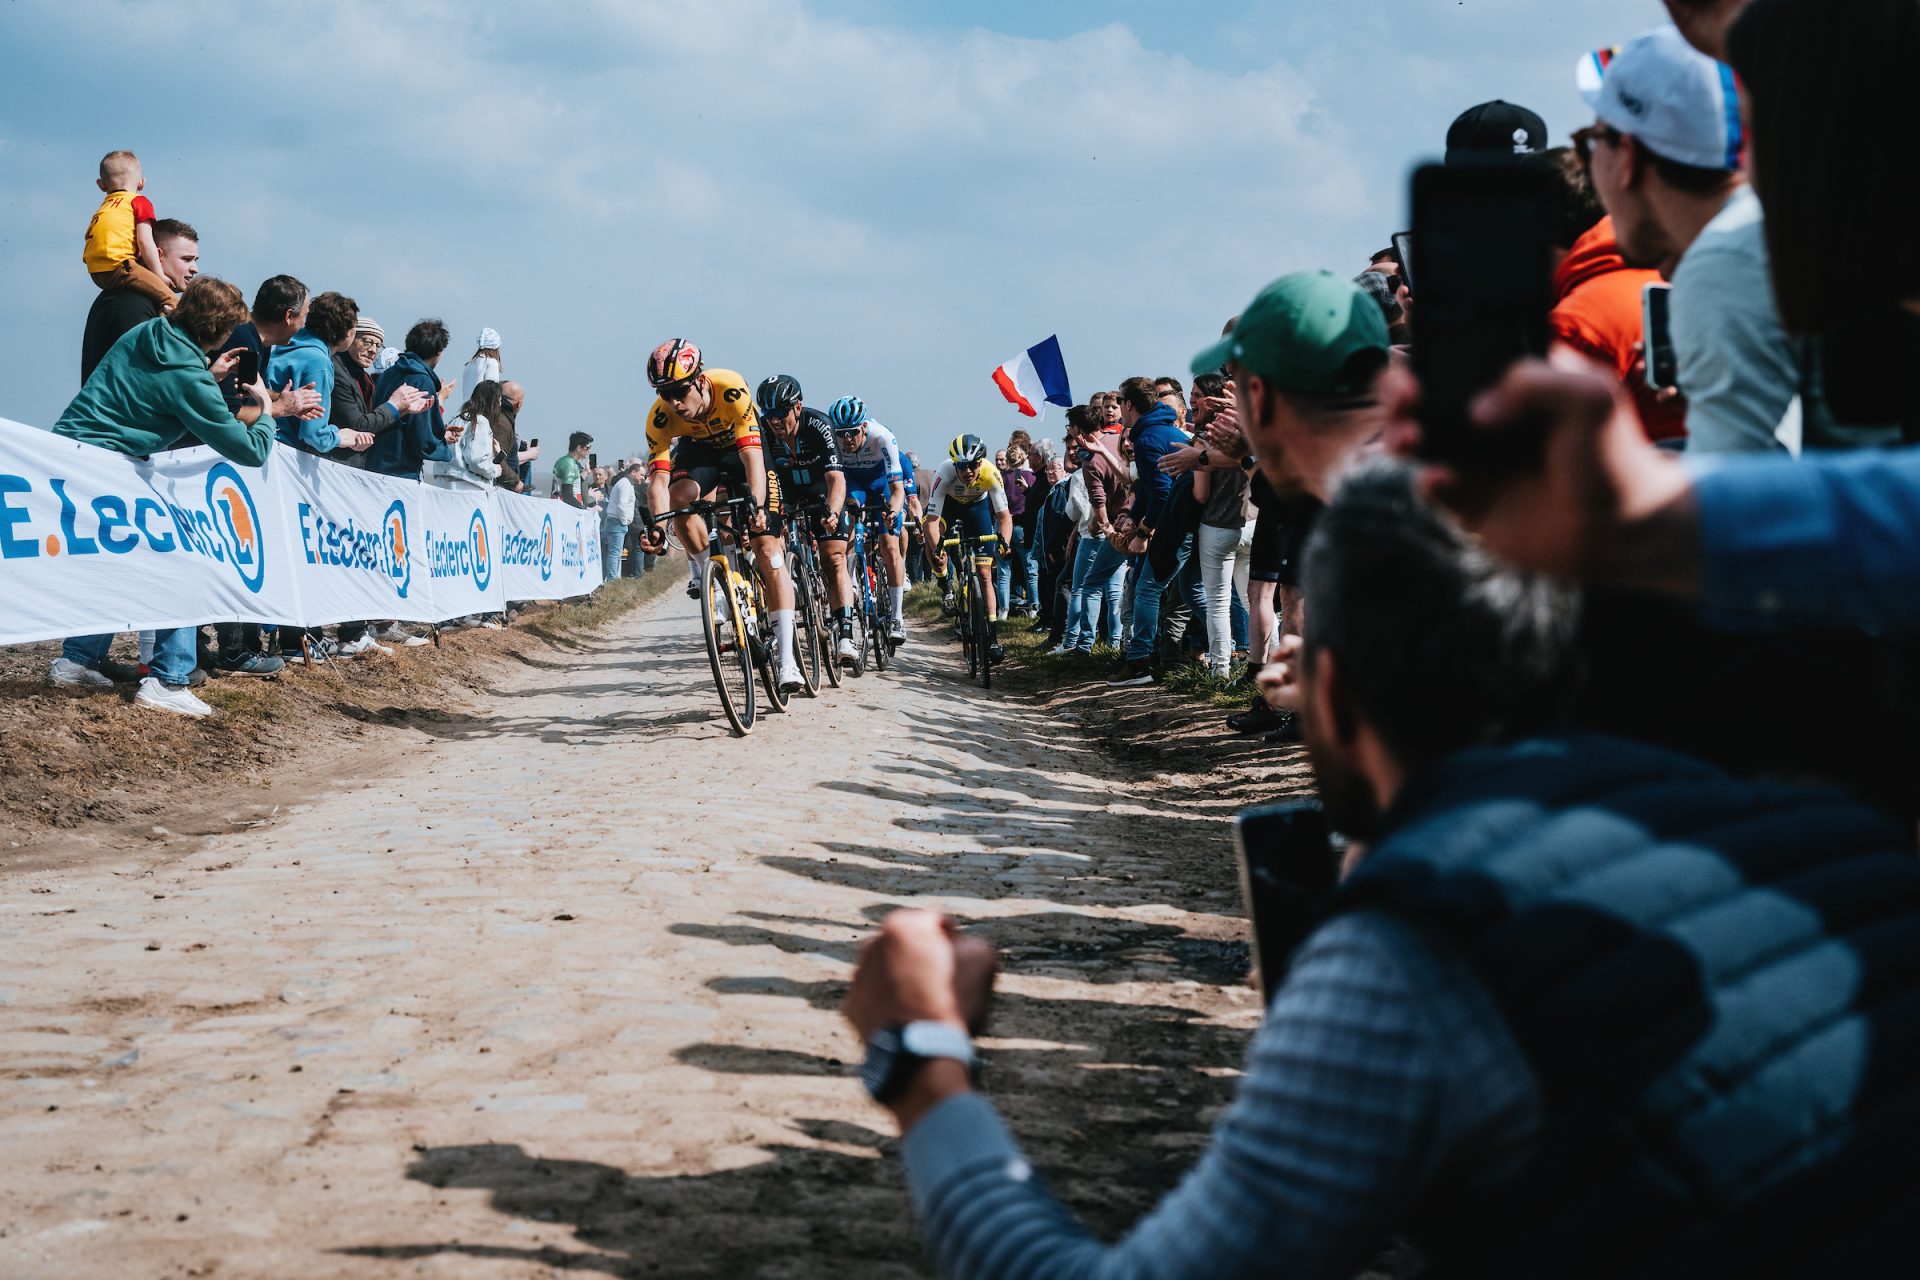 Wout van Aert leads the selection across dry and dusty cobbles. Throngs of fans crowd the edge of the lane.